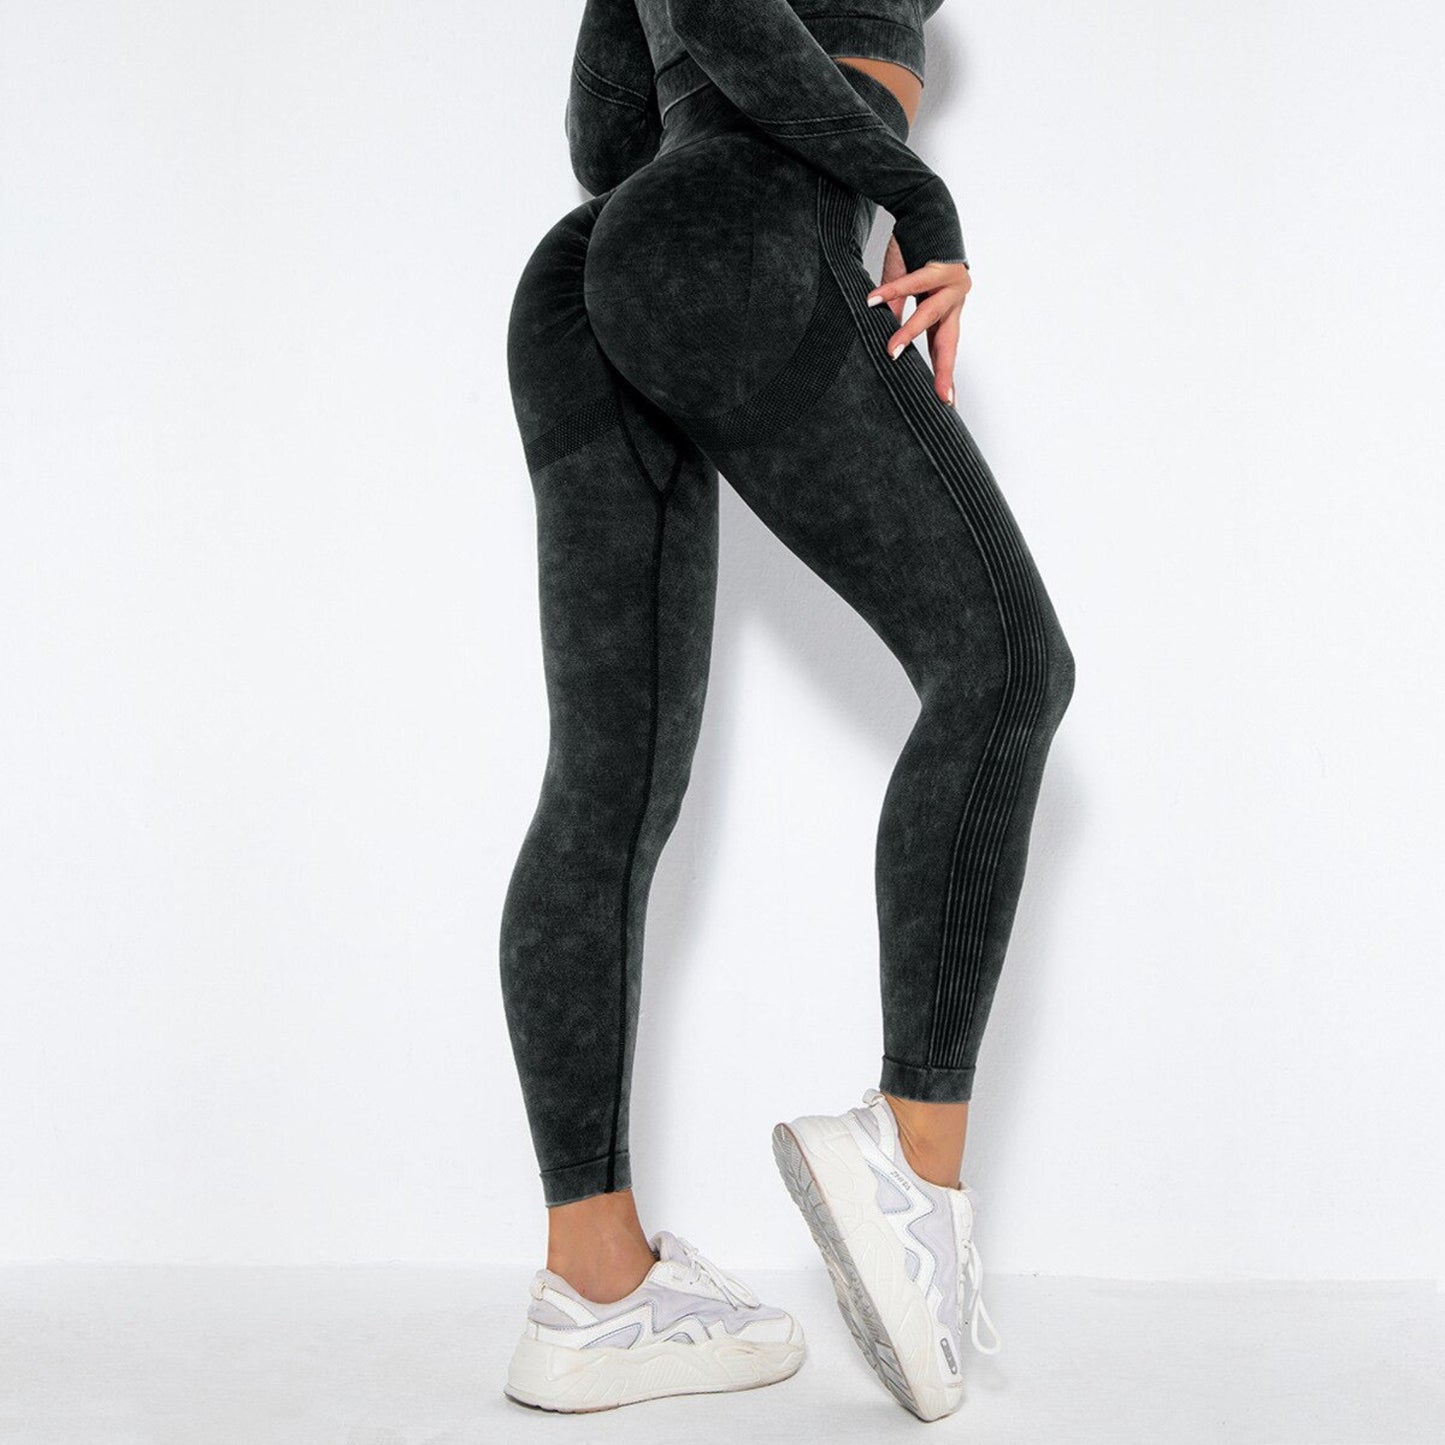 fitness female model wearing a black acid wash workout leggings that outline the booty well from Vibras Activewear